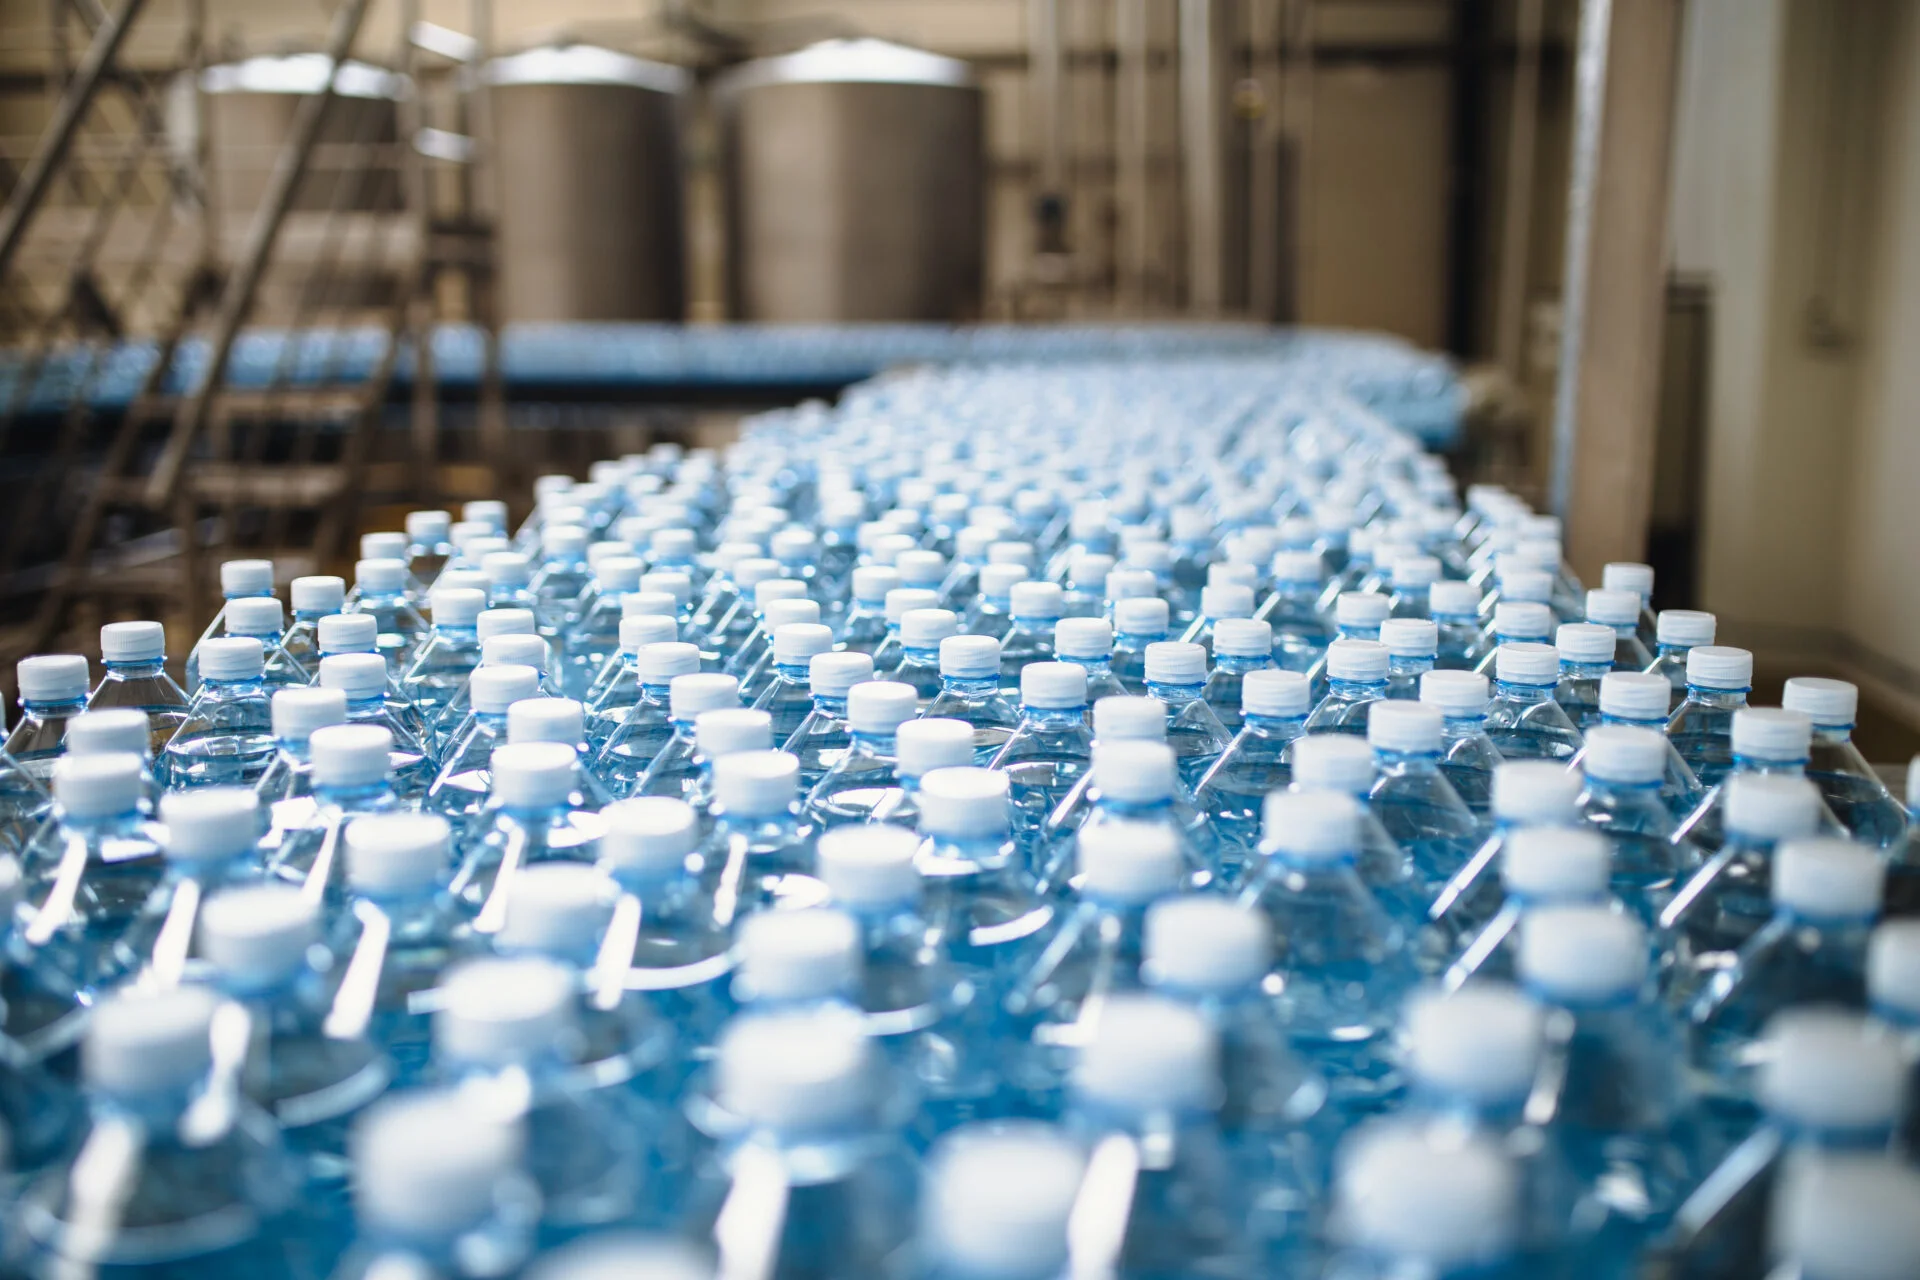 Plastic bottles at a factory